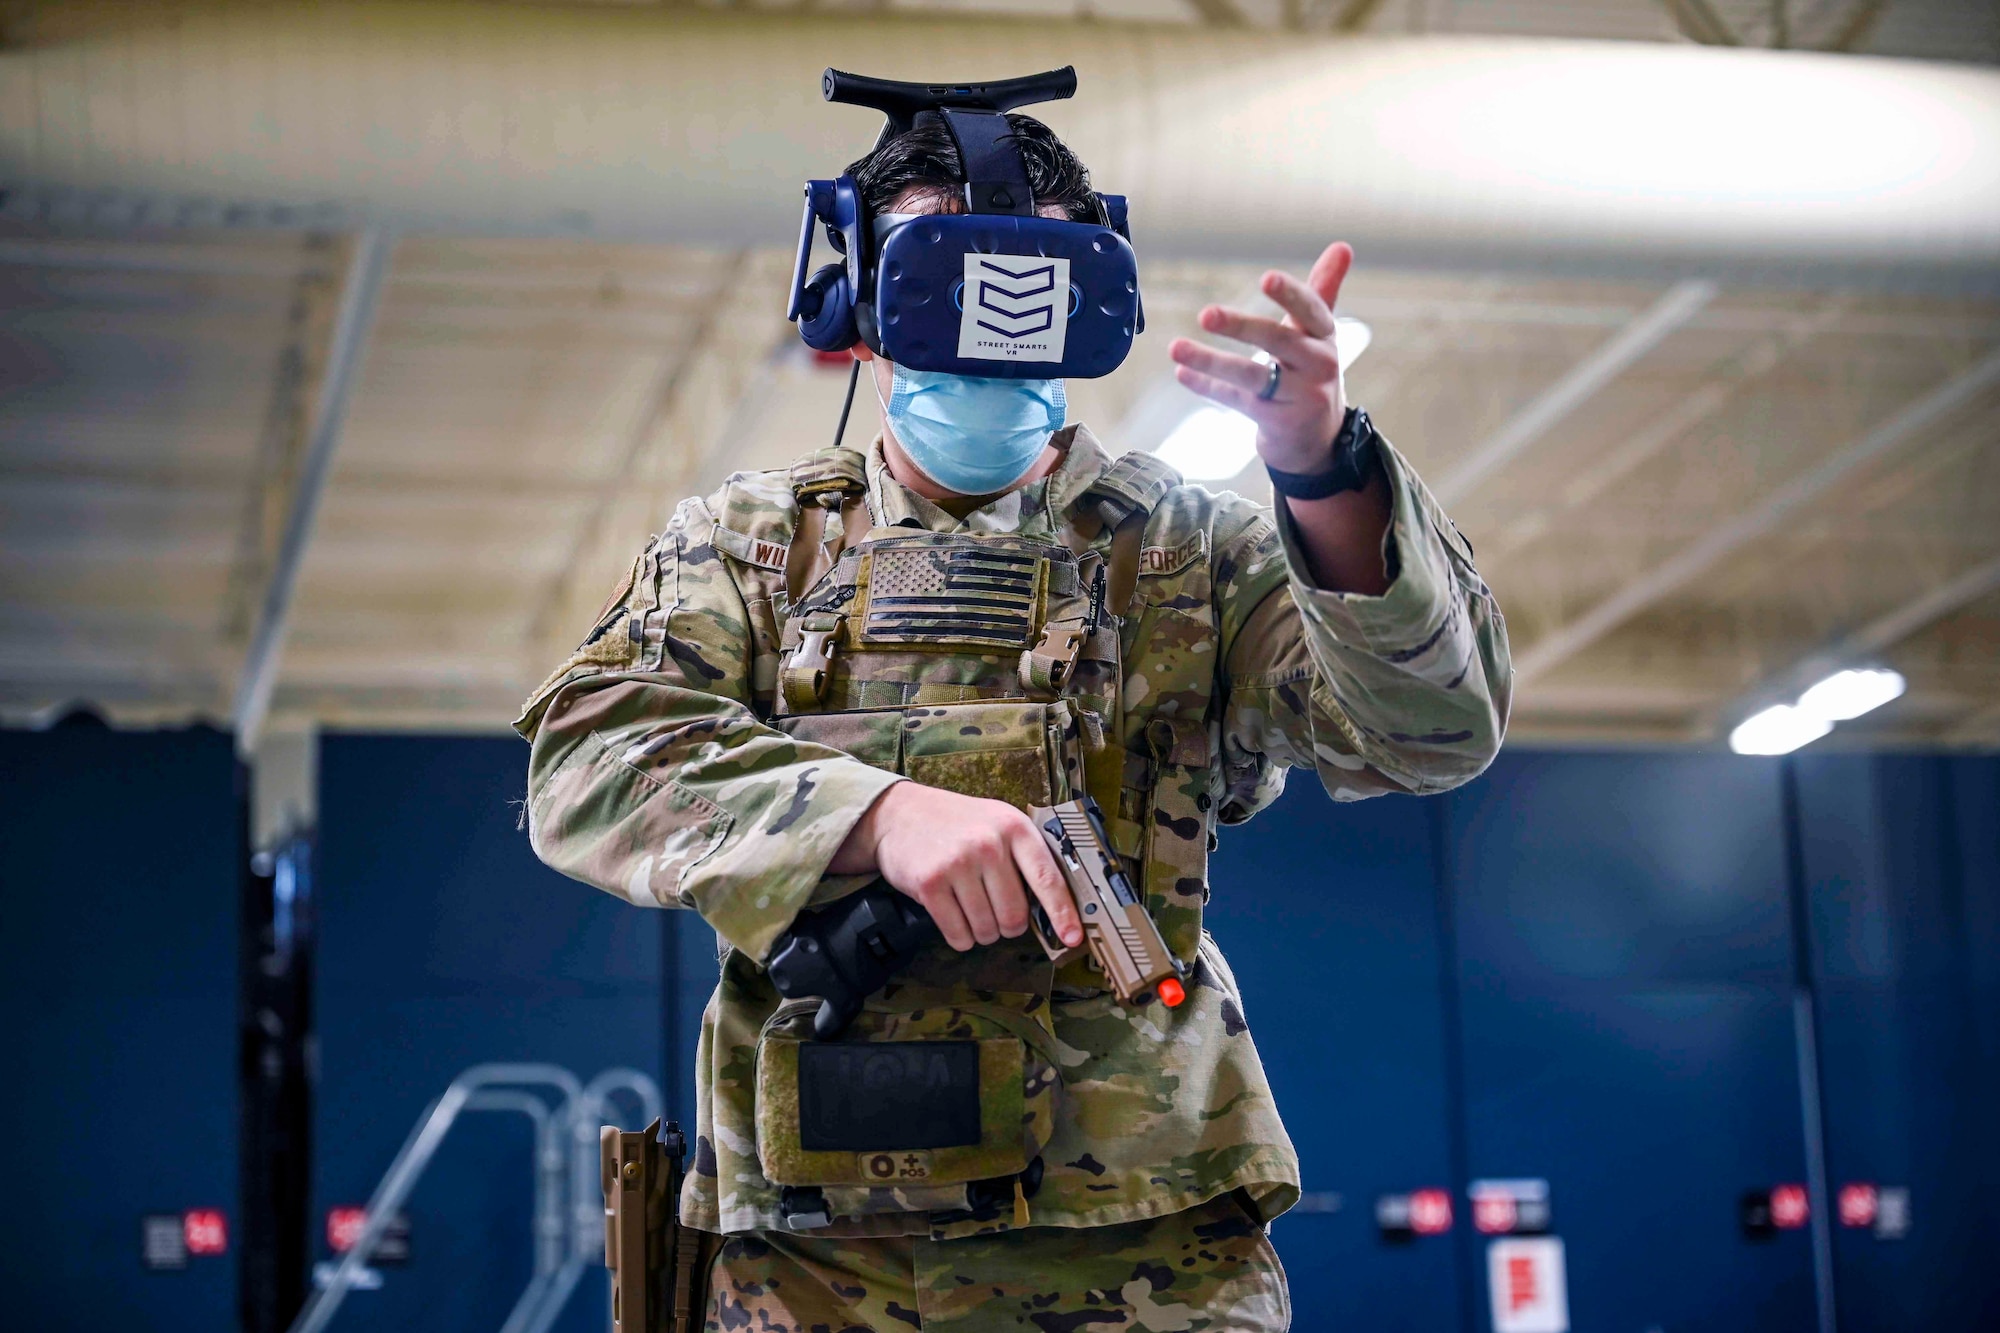 A Airman simulates de-escalating an armed person while using Virtual Reality.